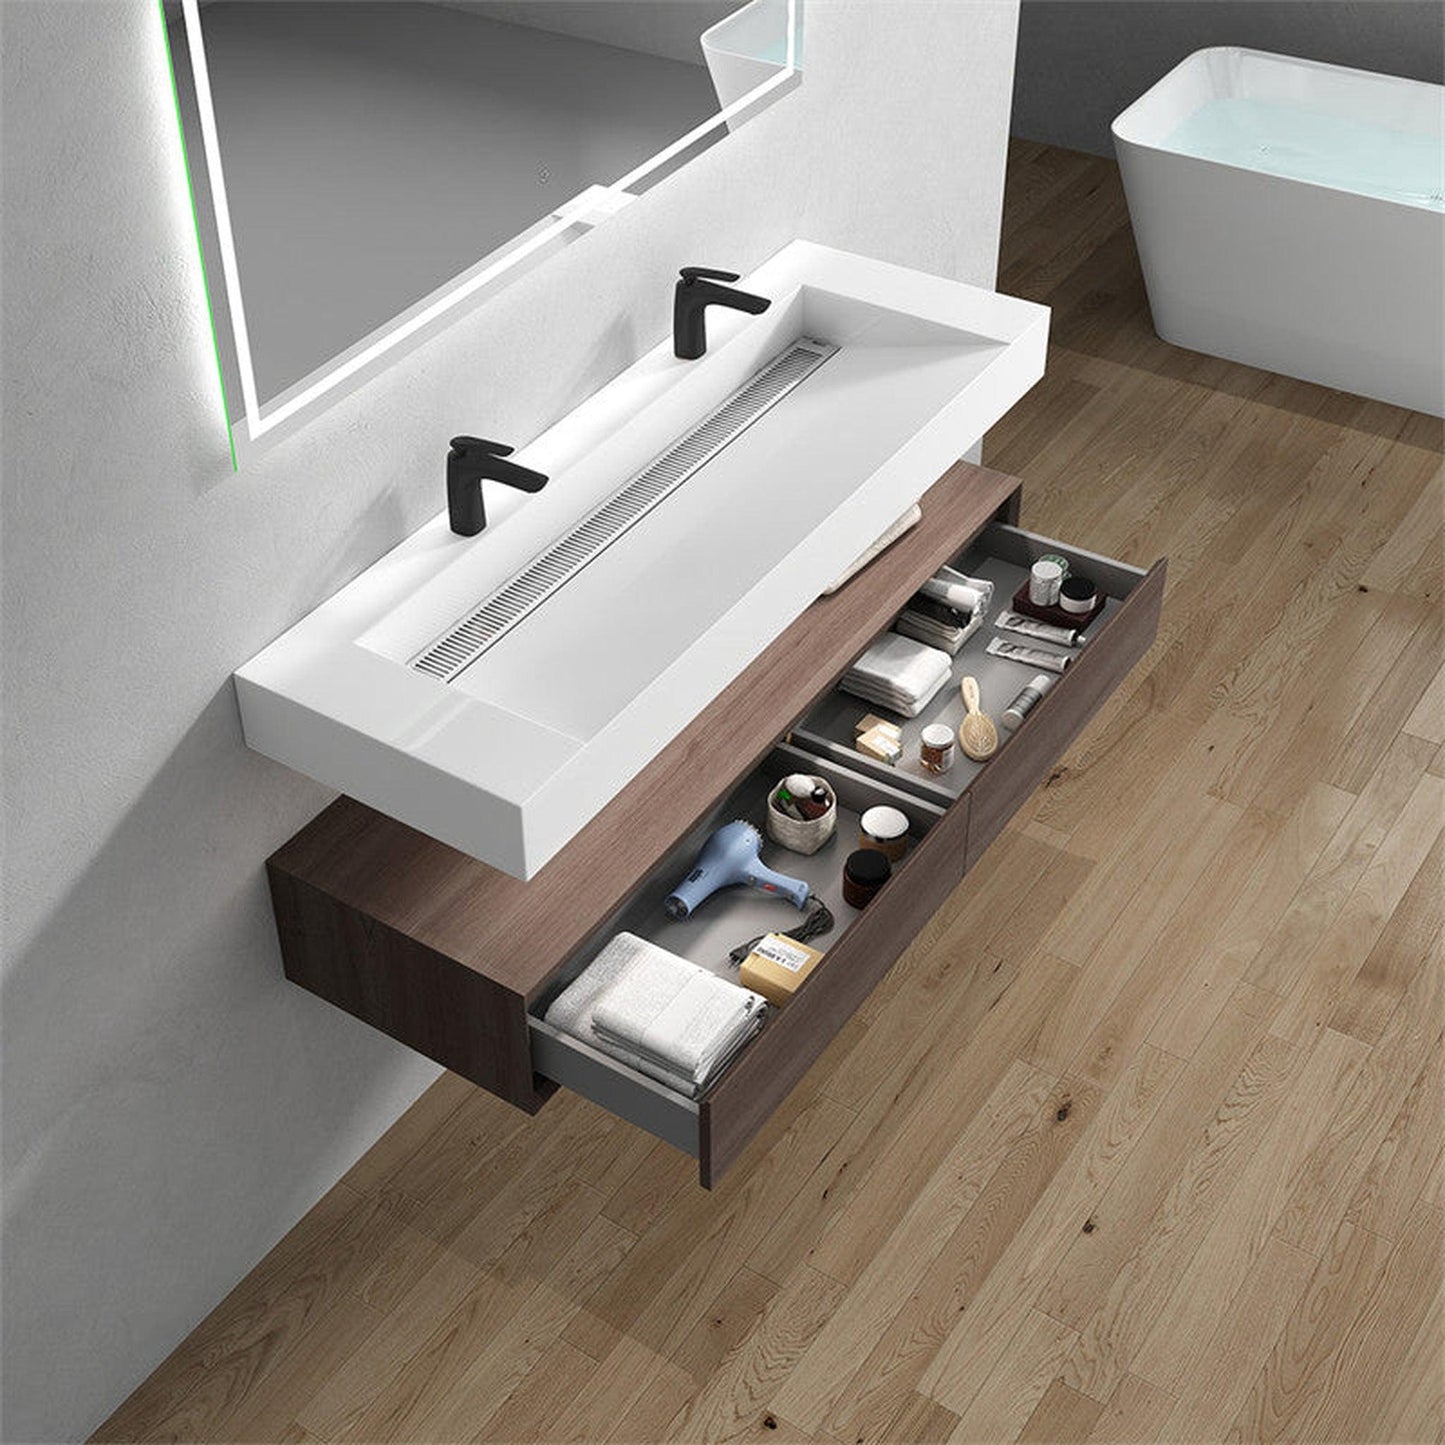 Moreno Bath ALYSA 60" Red Oak Floating Vanity With Double Faucet Holes and Reinforced White Acrylic Sink